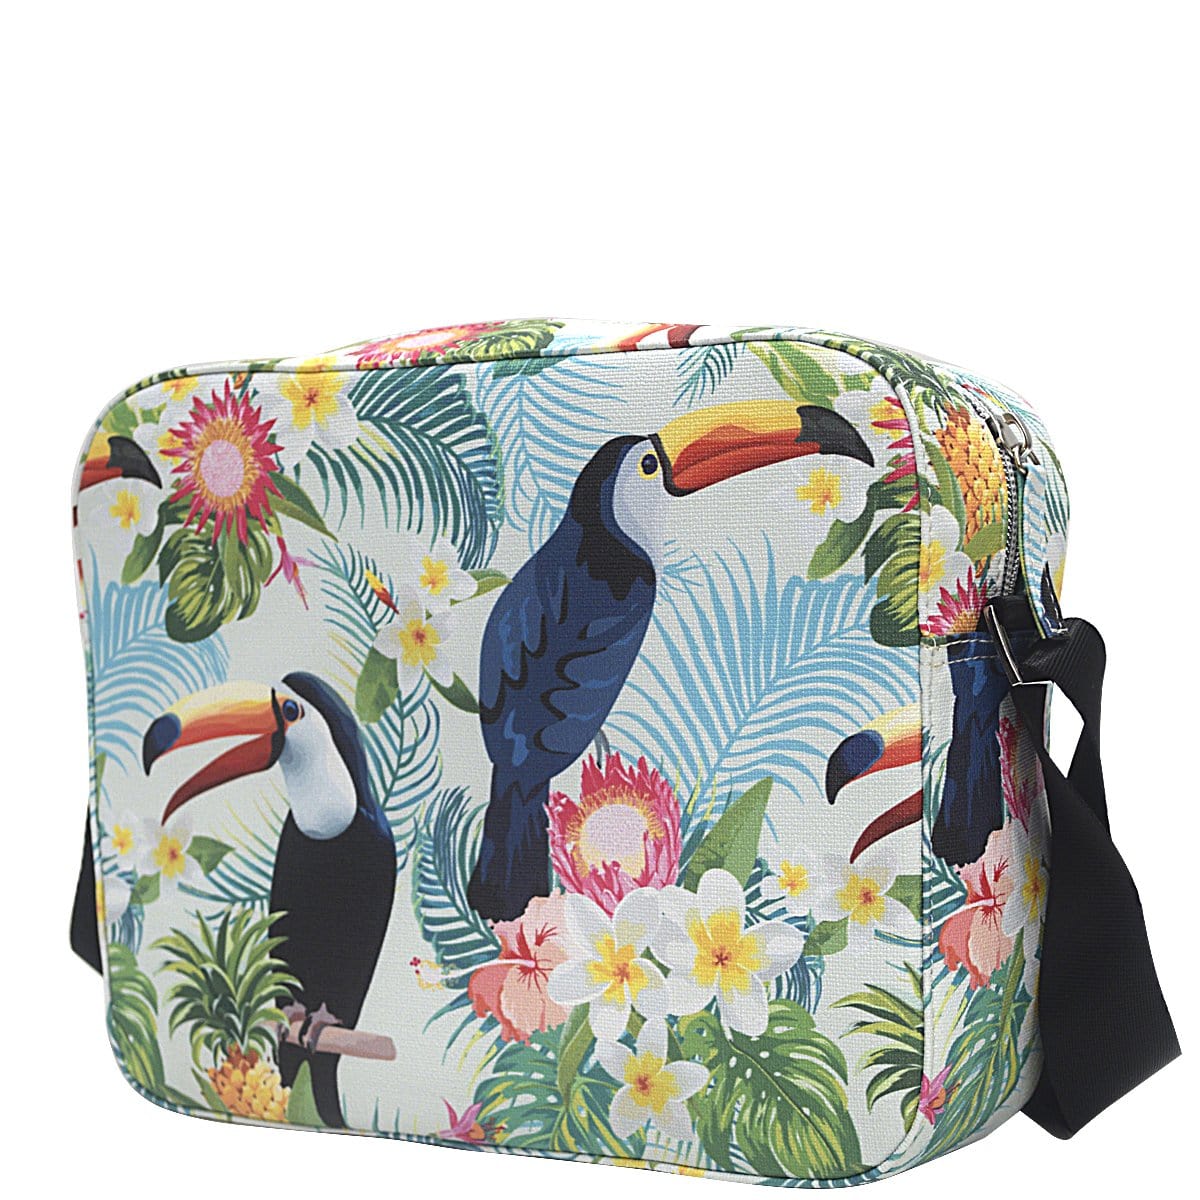 Hold-All - Toucan Print - SALE 50% off